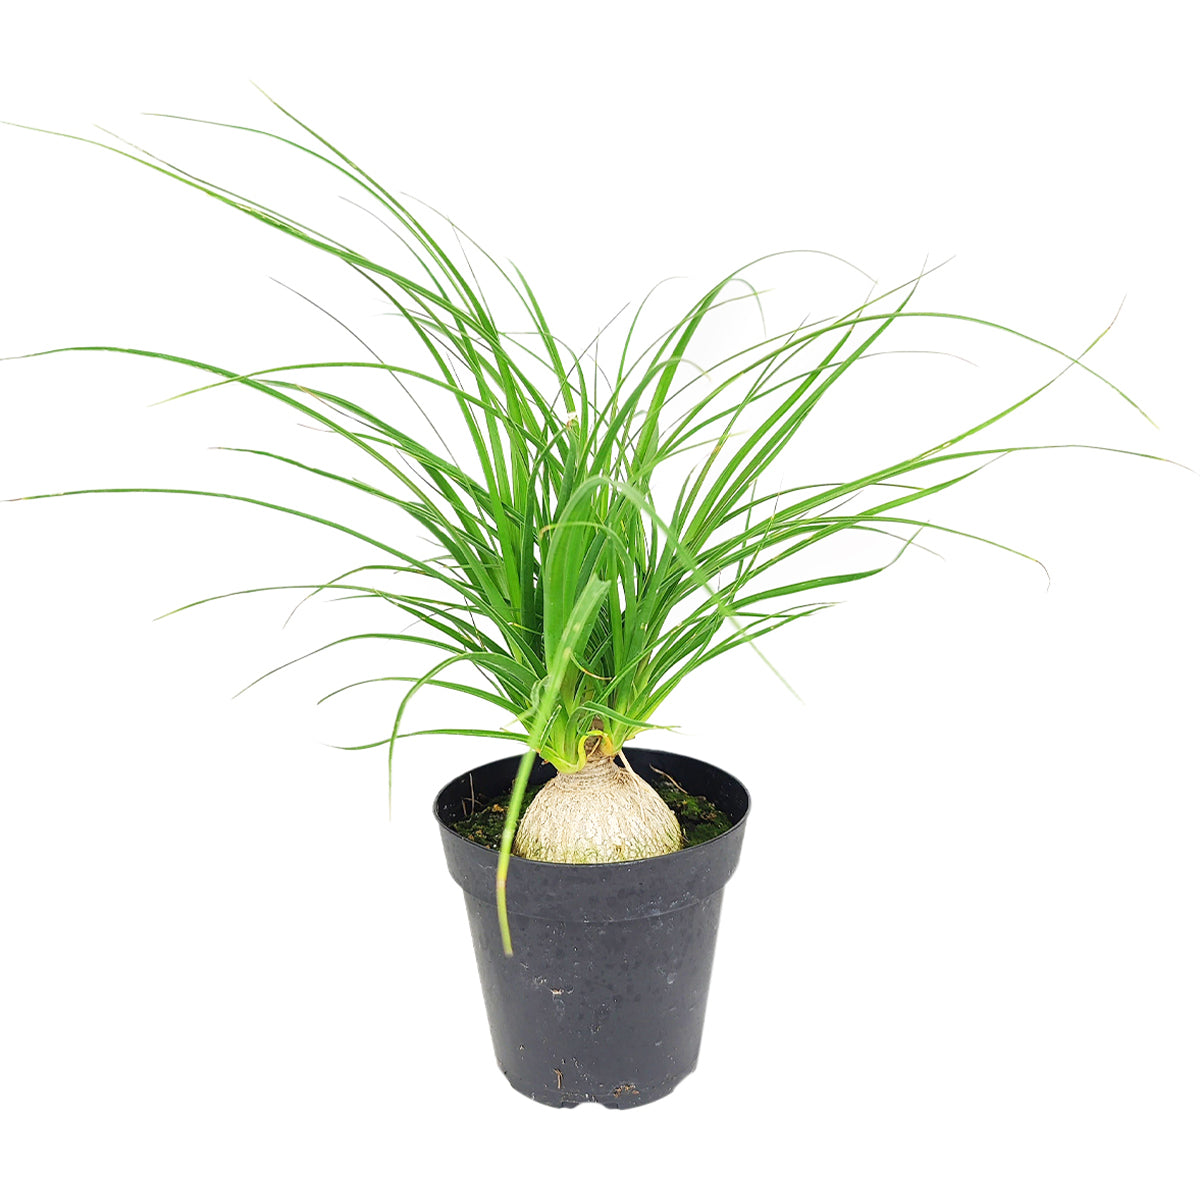 Ponytail Stump palm, Beaucarnea recurvata, succulent with palm-like foliage, easiest houseplant, easy plant for beginners and busy people, compact desktop plant, best houseplant gift ideas